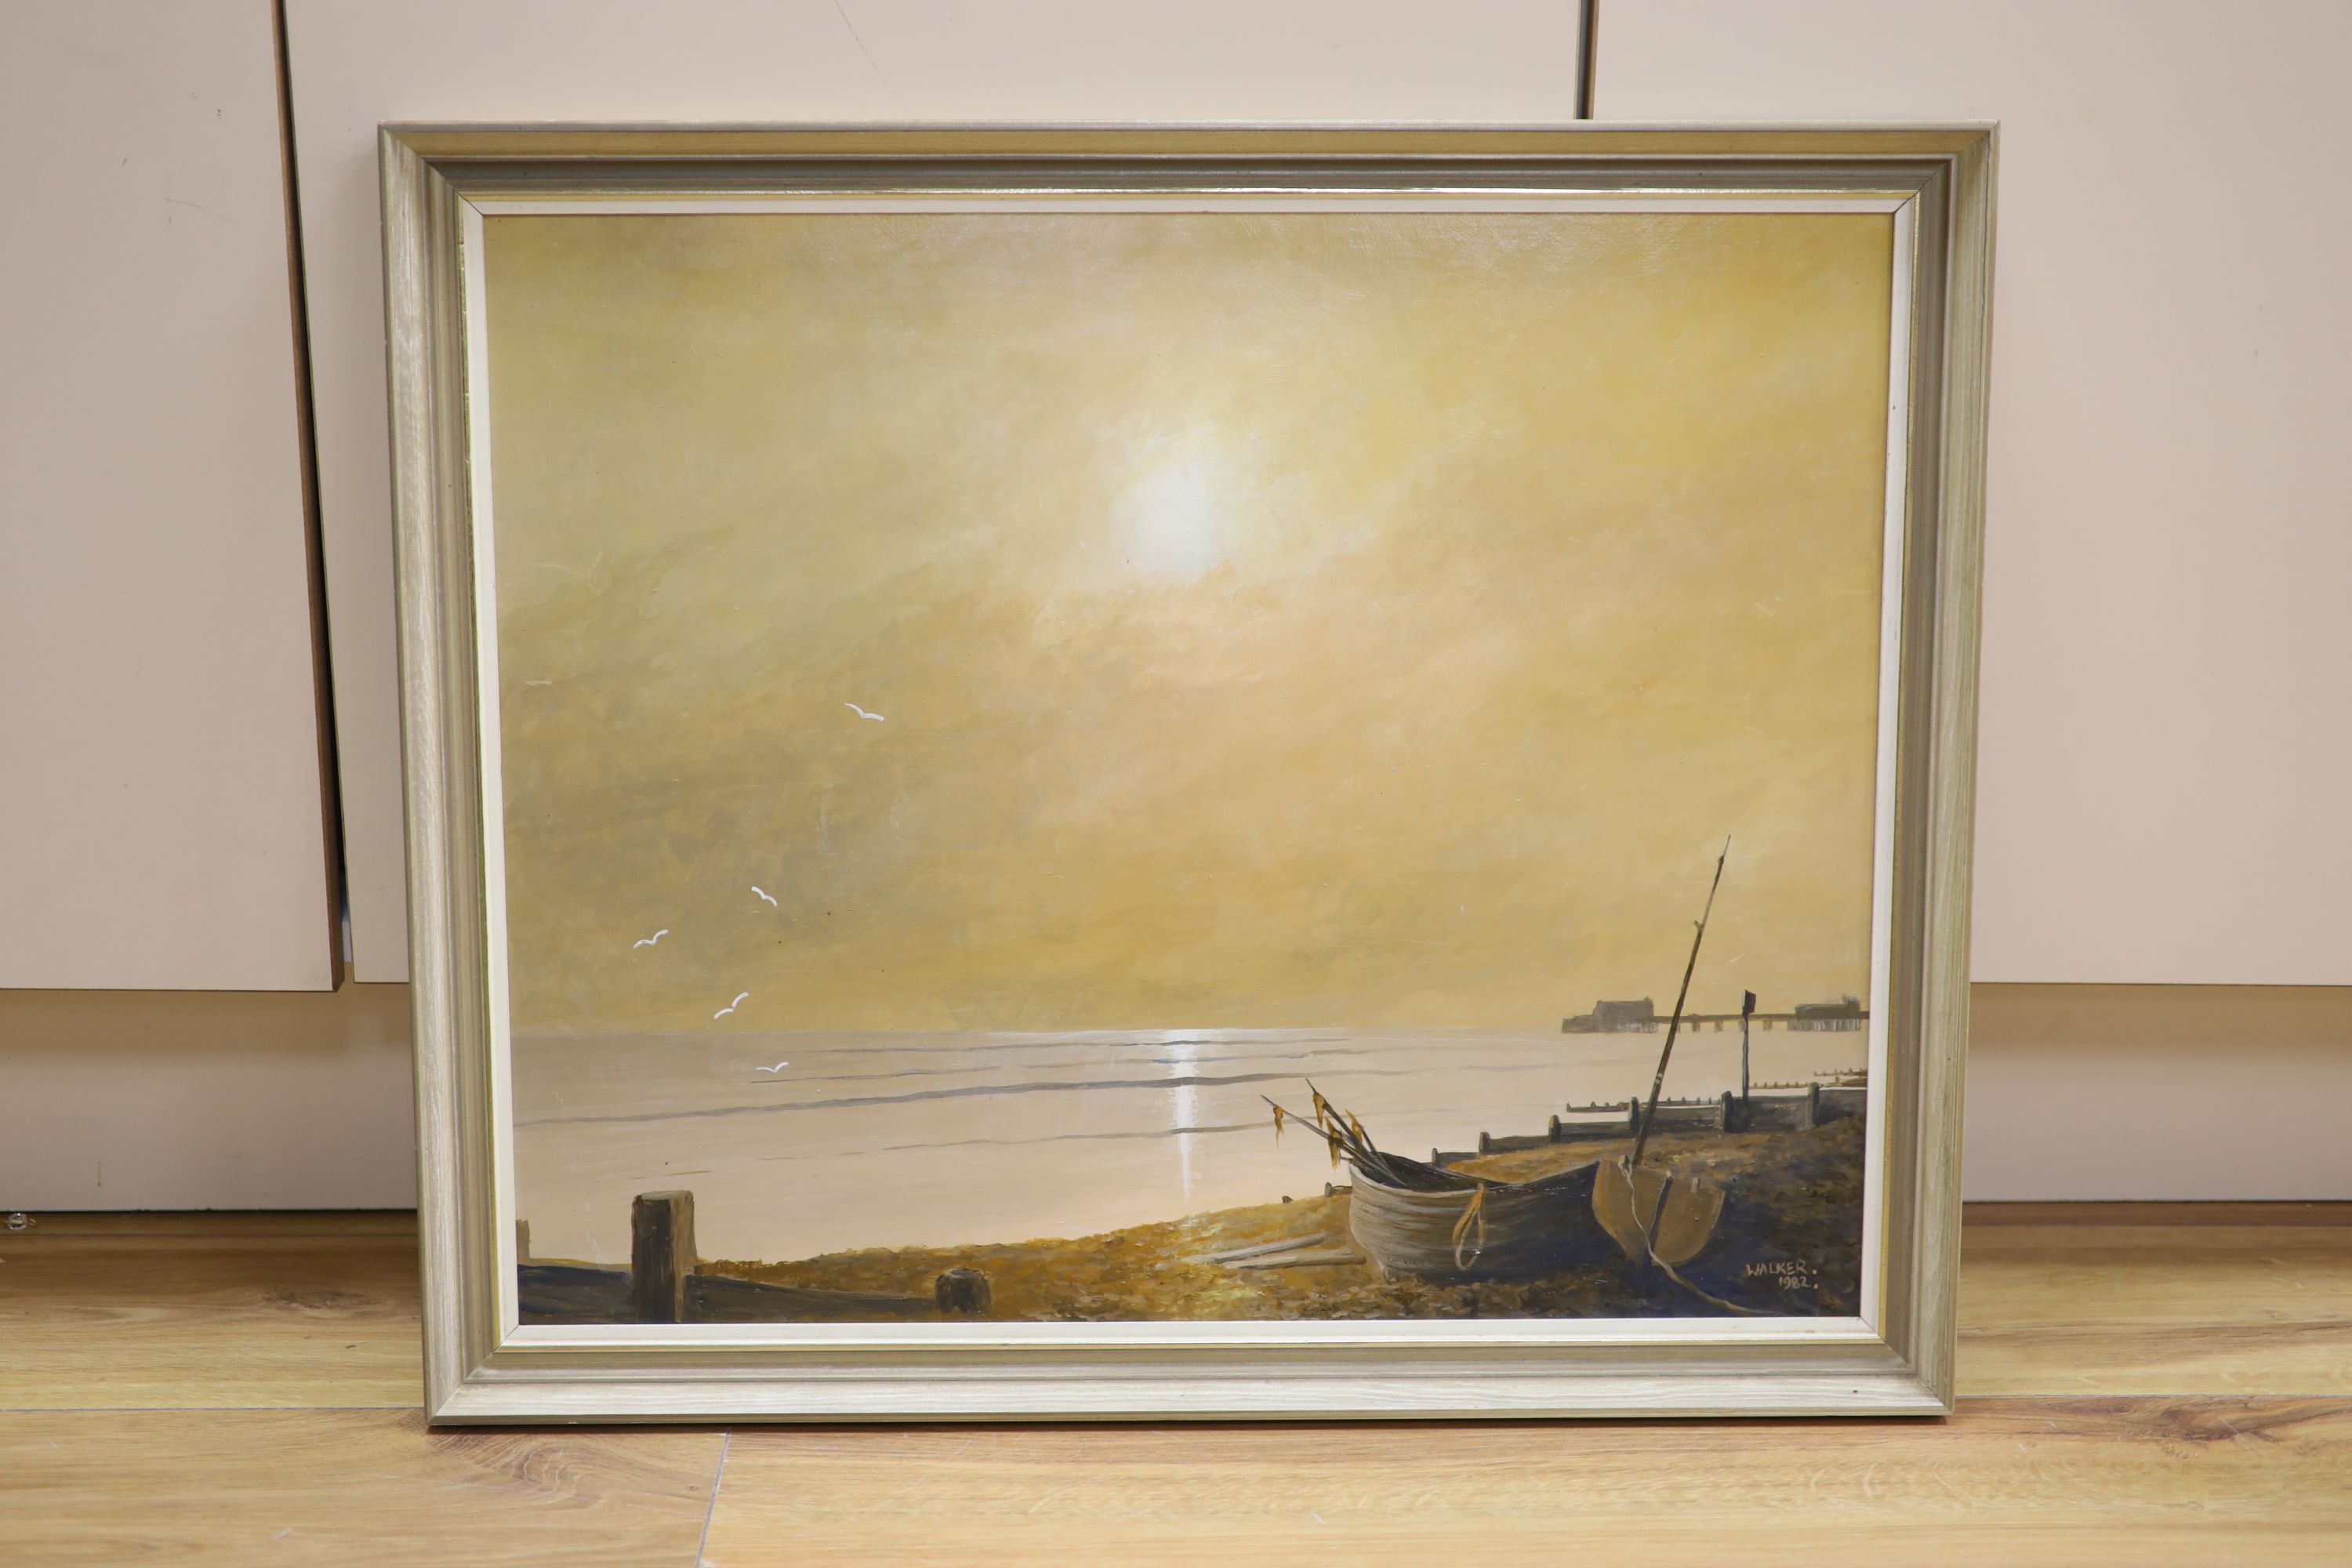 Walker 1982, oil on board, Beach scene with pier, signed and dated, 44 x 54cm